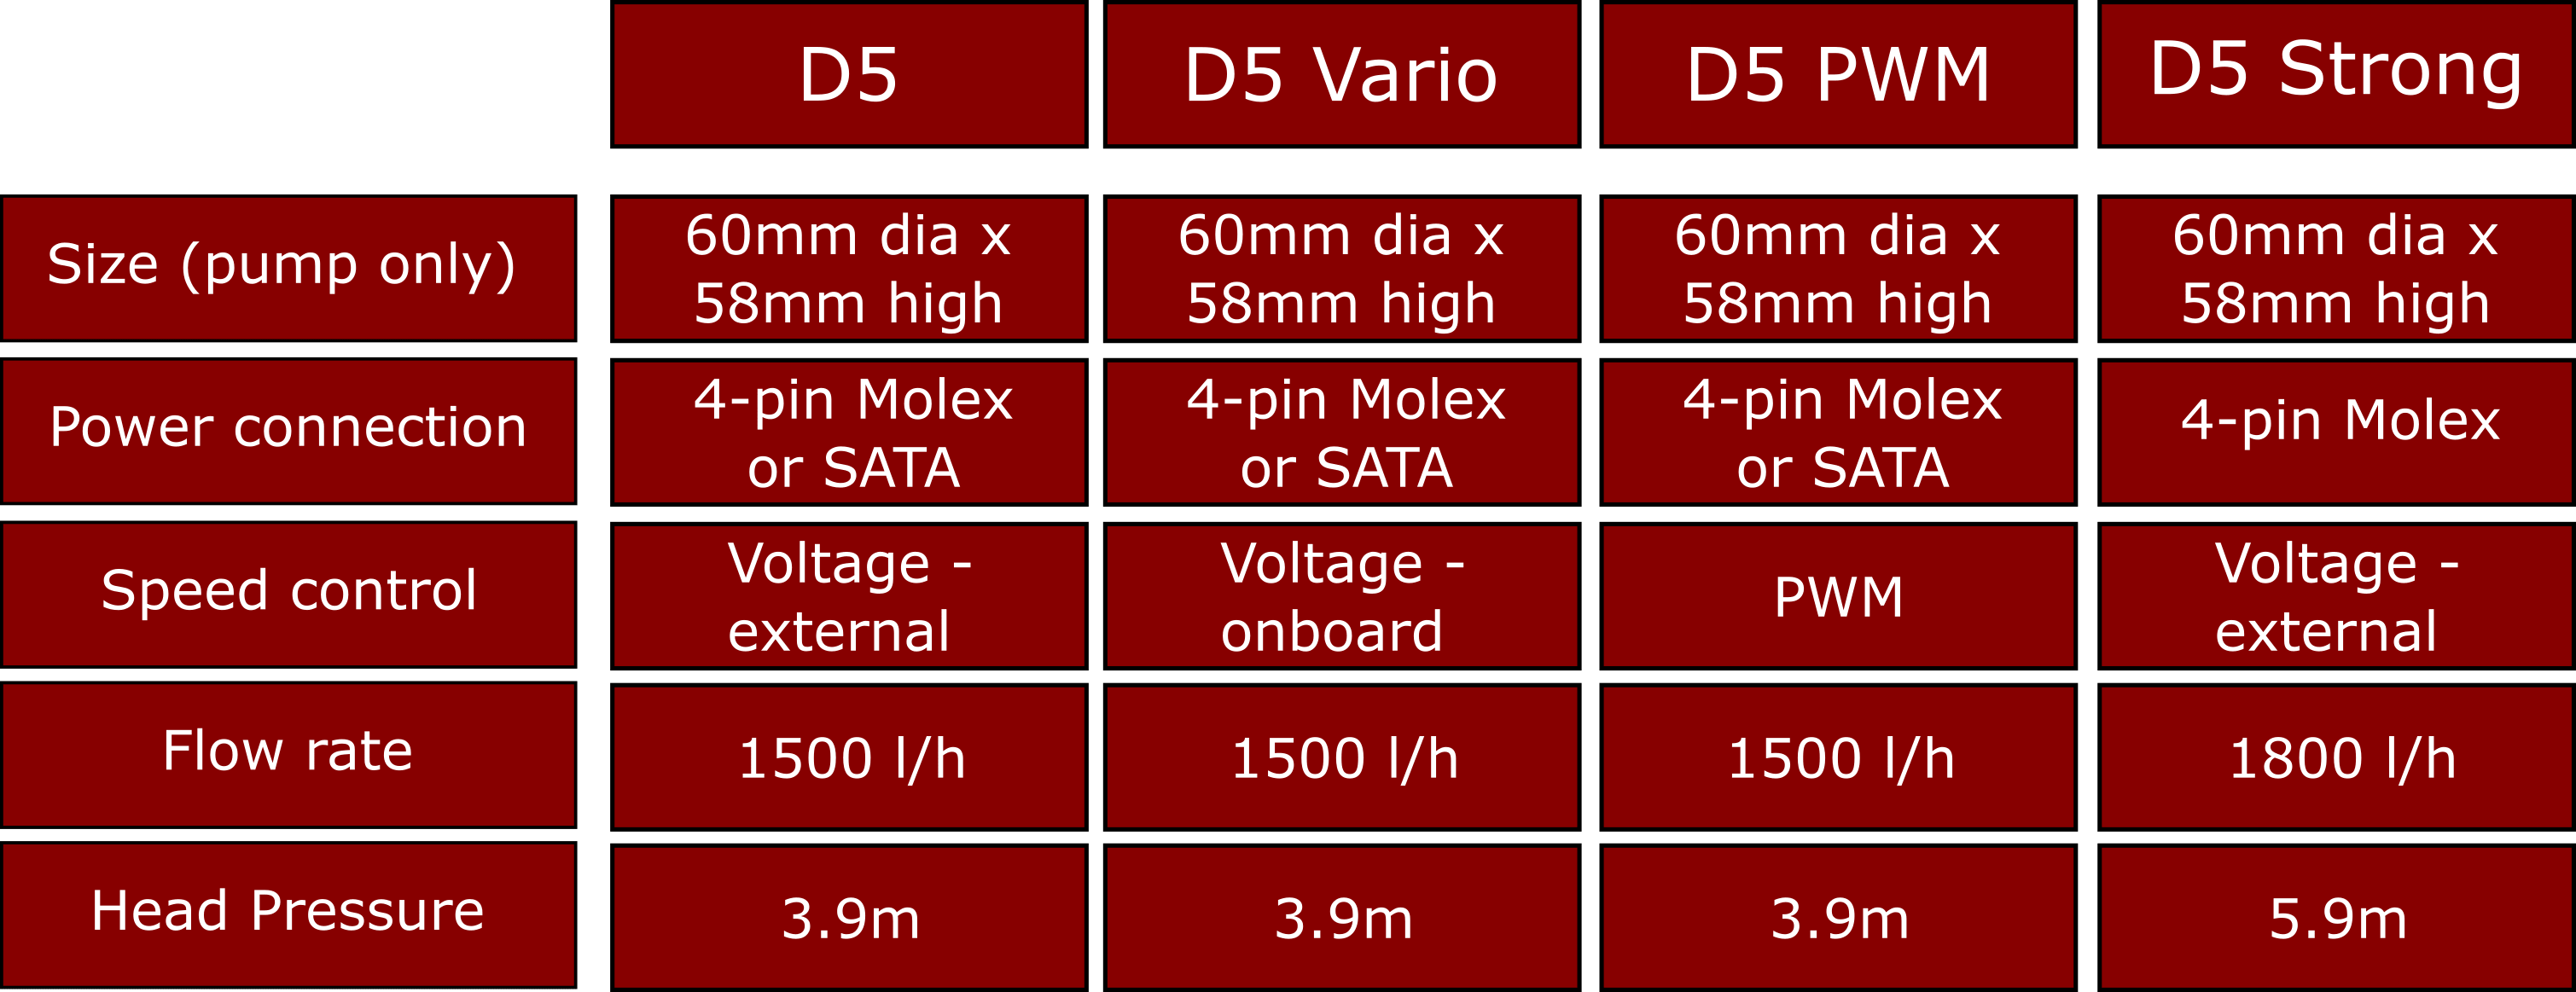 Types of D5 water pumps available